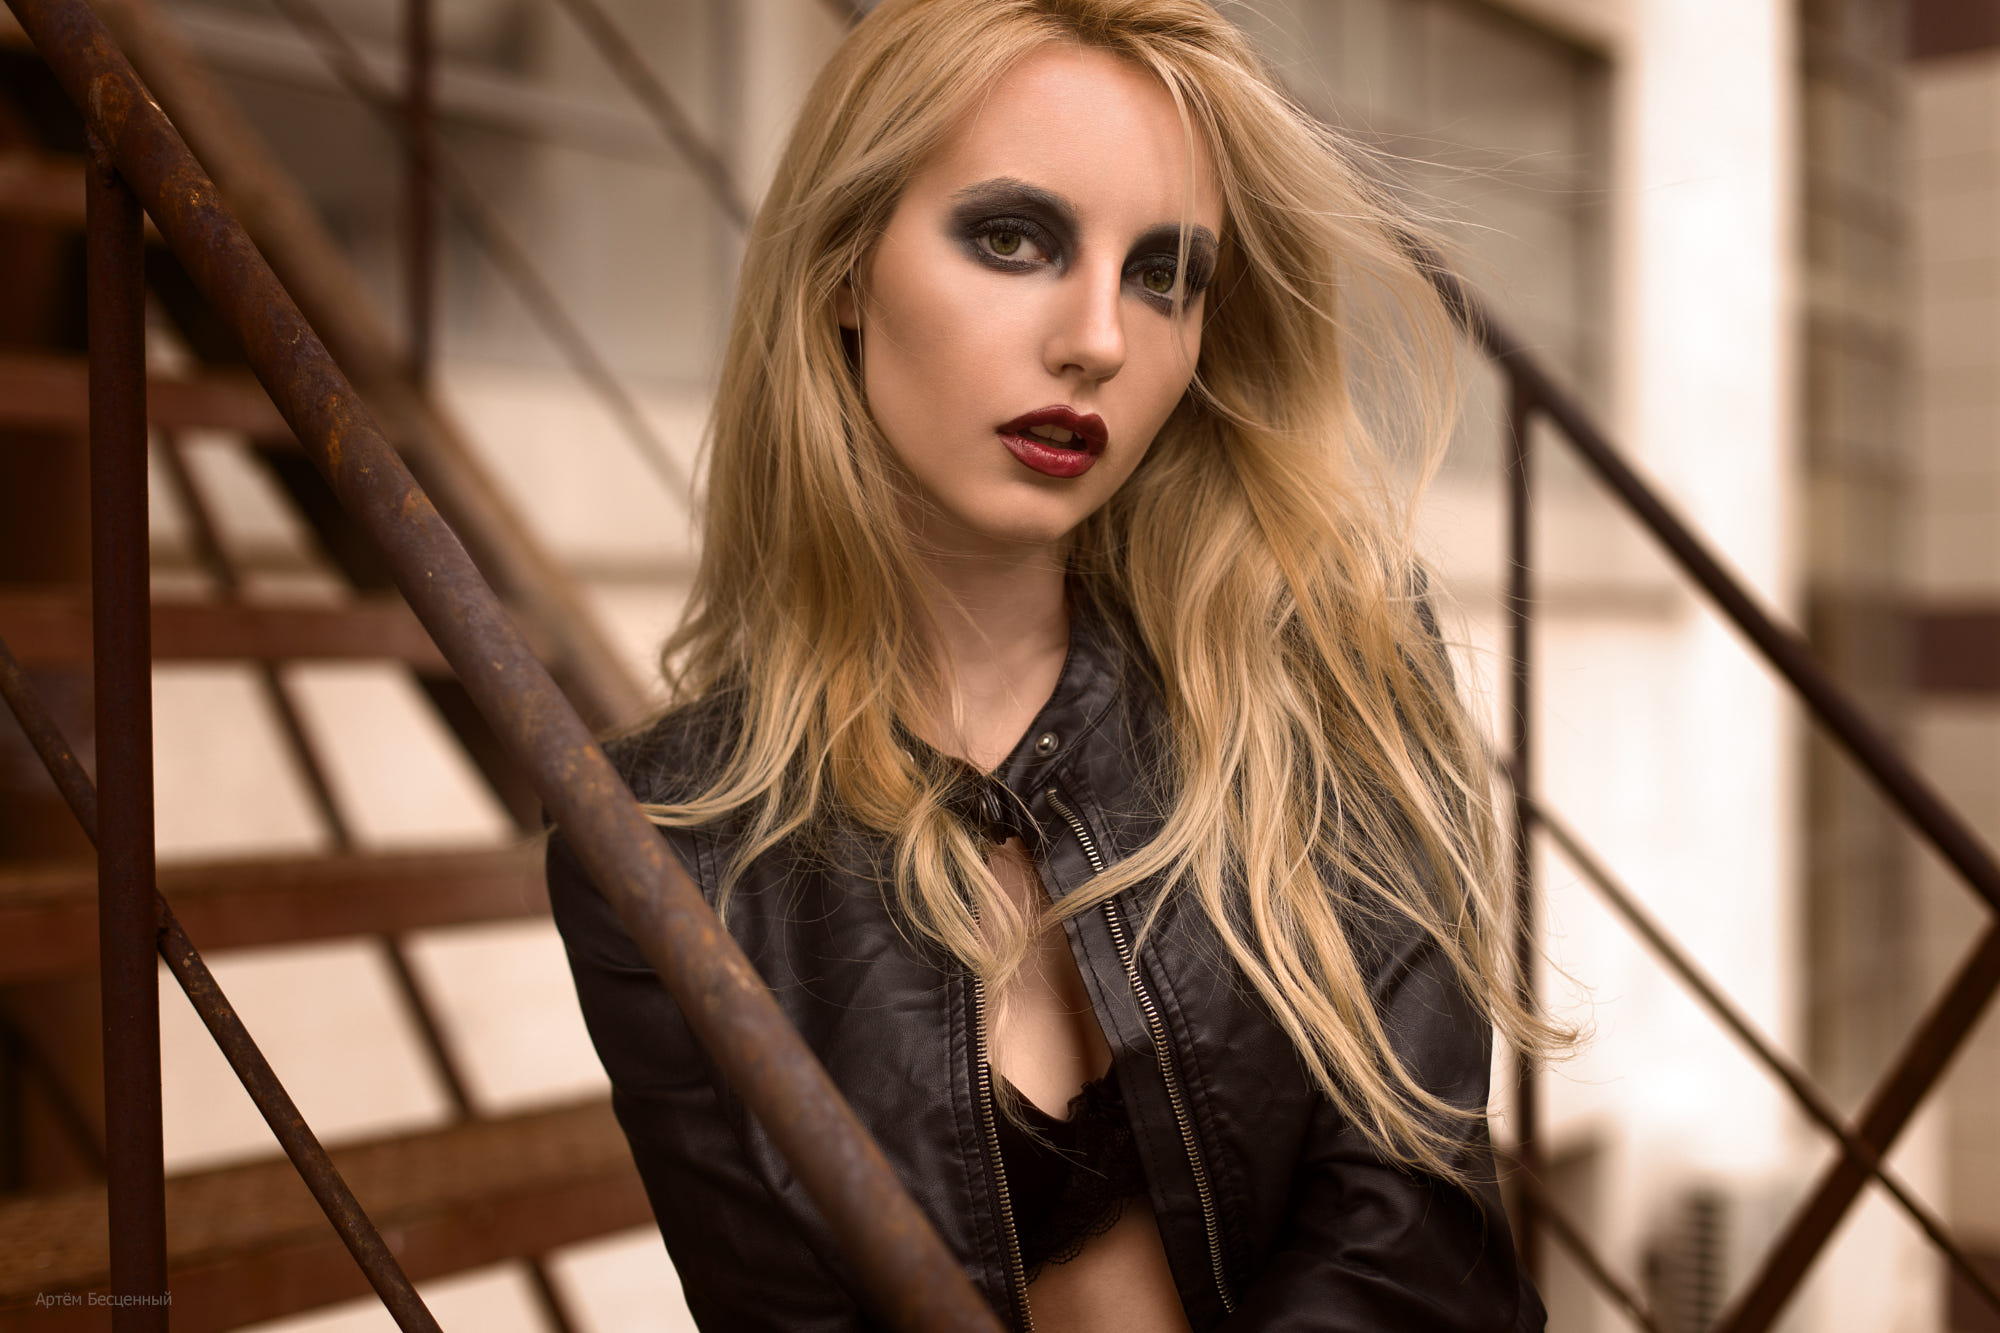 Blonde Jacket Leather Model Stairs Makeup 2000x1333